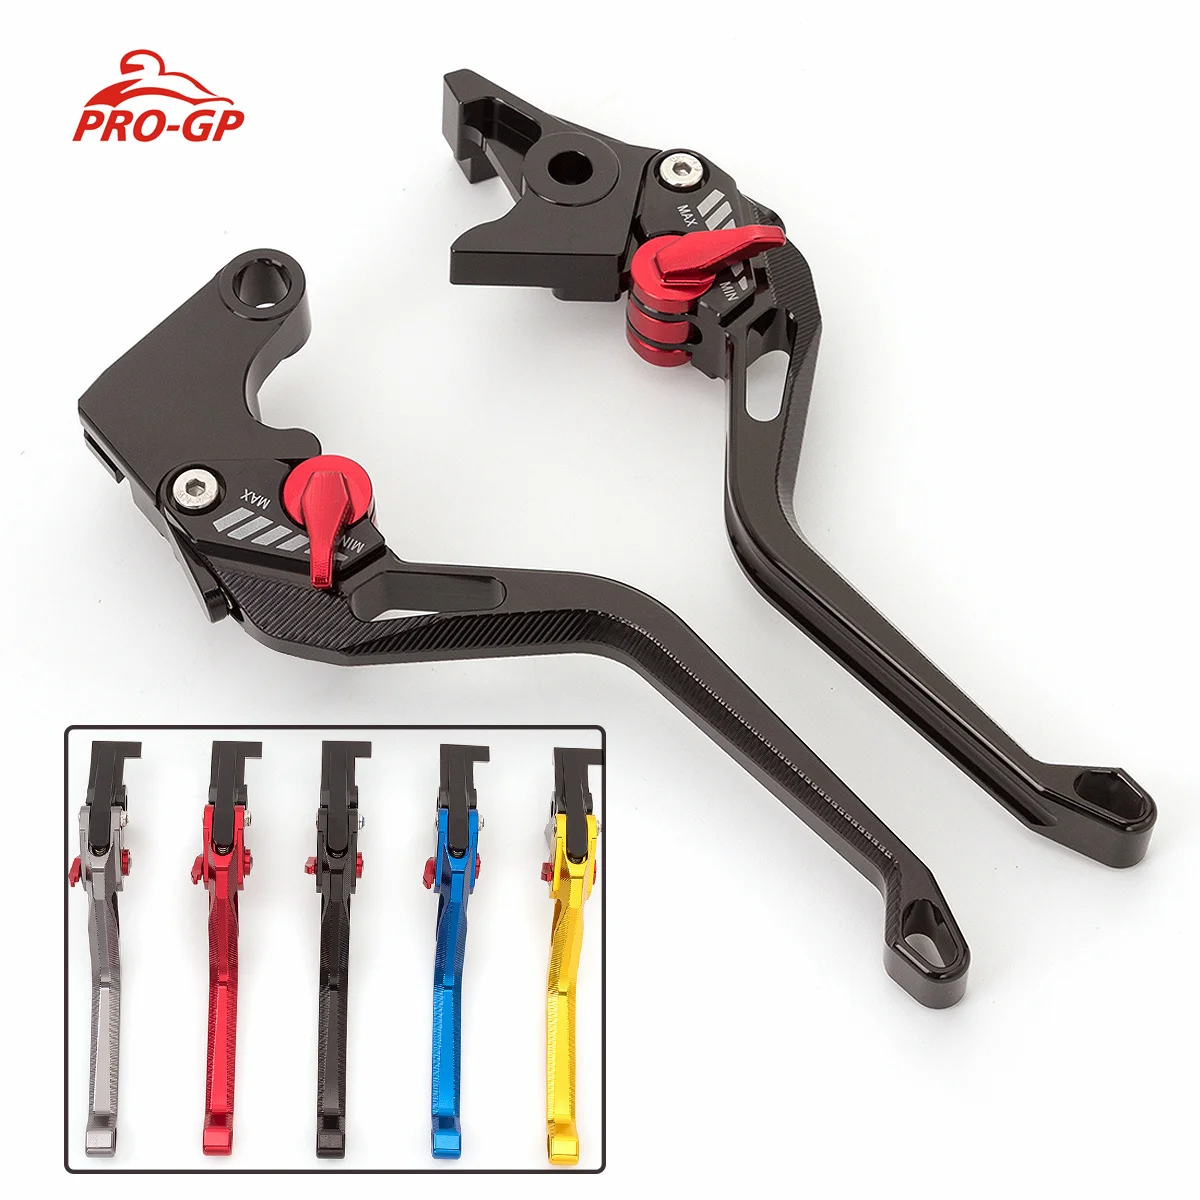 

Motorcycle CNC Brake Clutch Lever Handle For Ducati 796 696 MONSTER 696 HYPERMOTARD 796 2009-2014 2013 2012 2011 2010 2009